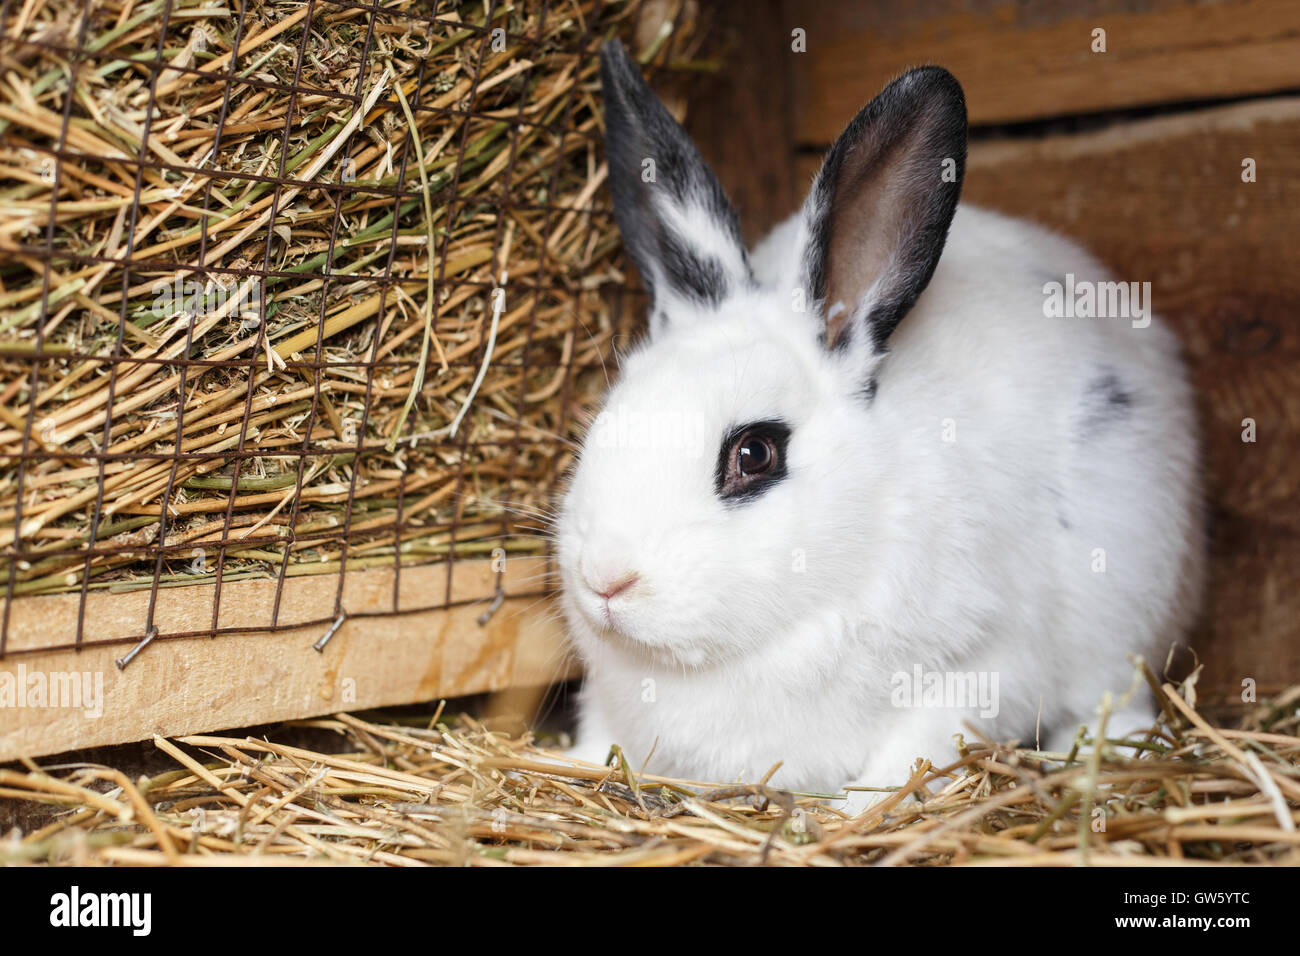 Cute white bunny sitting near basket filled with hay in a cage on farmyard Stock Photo